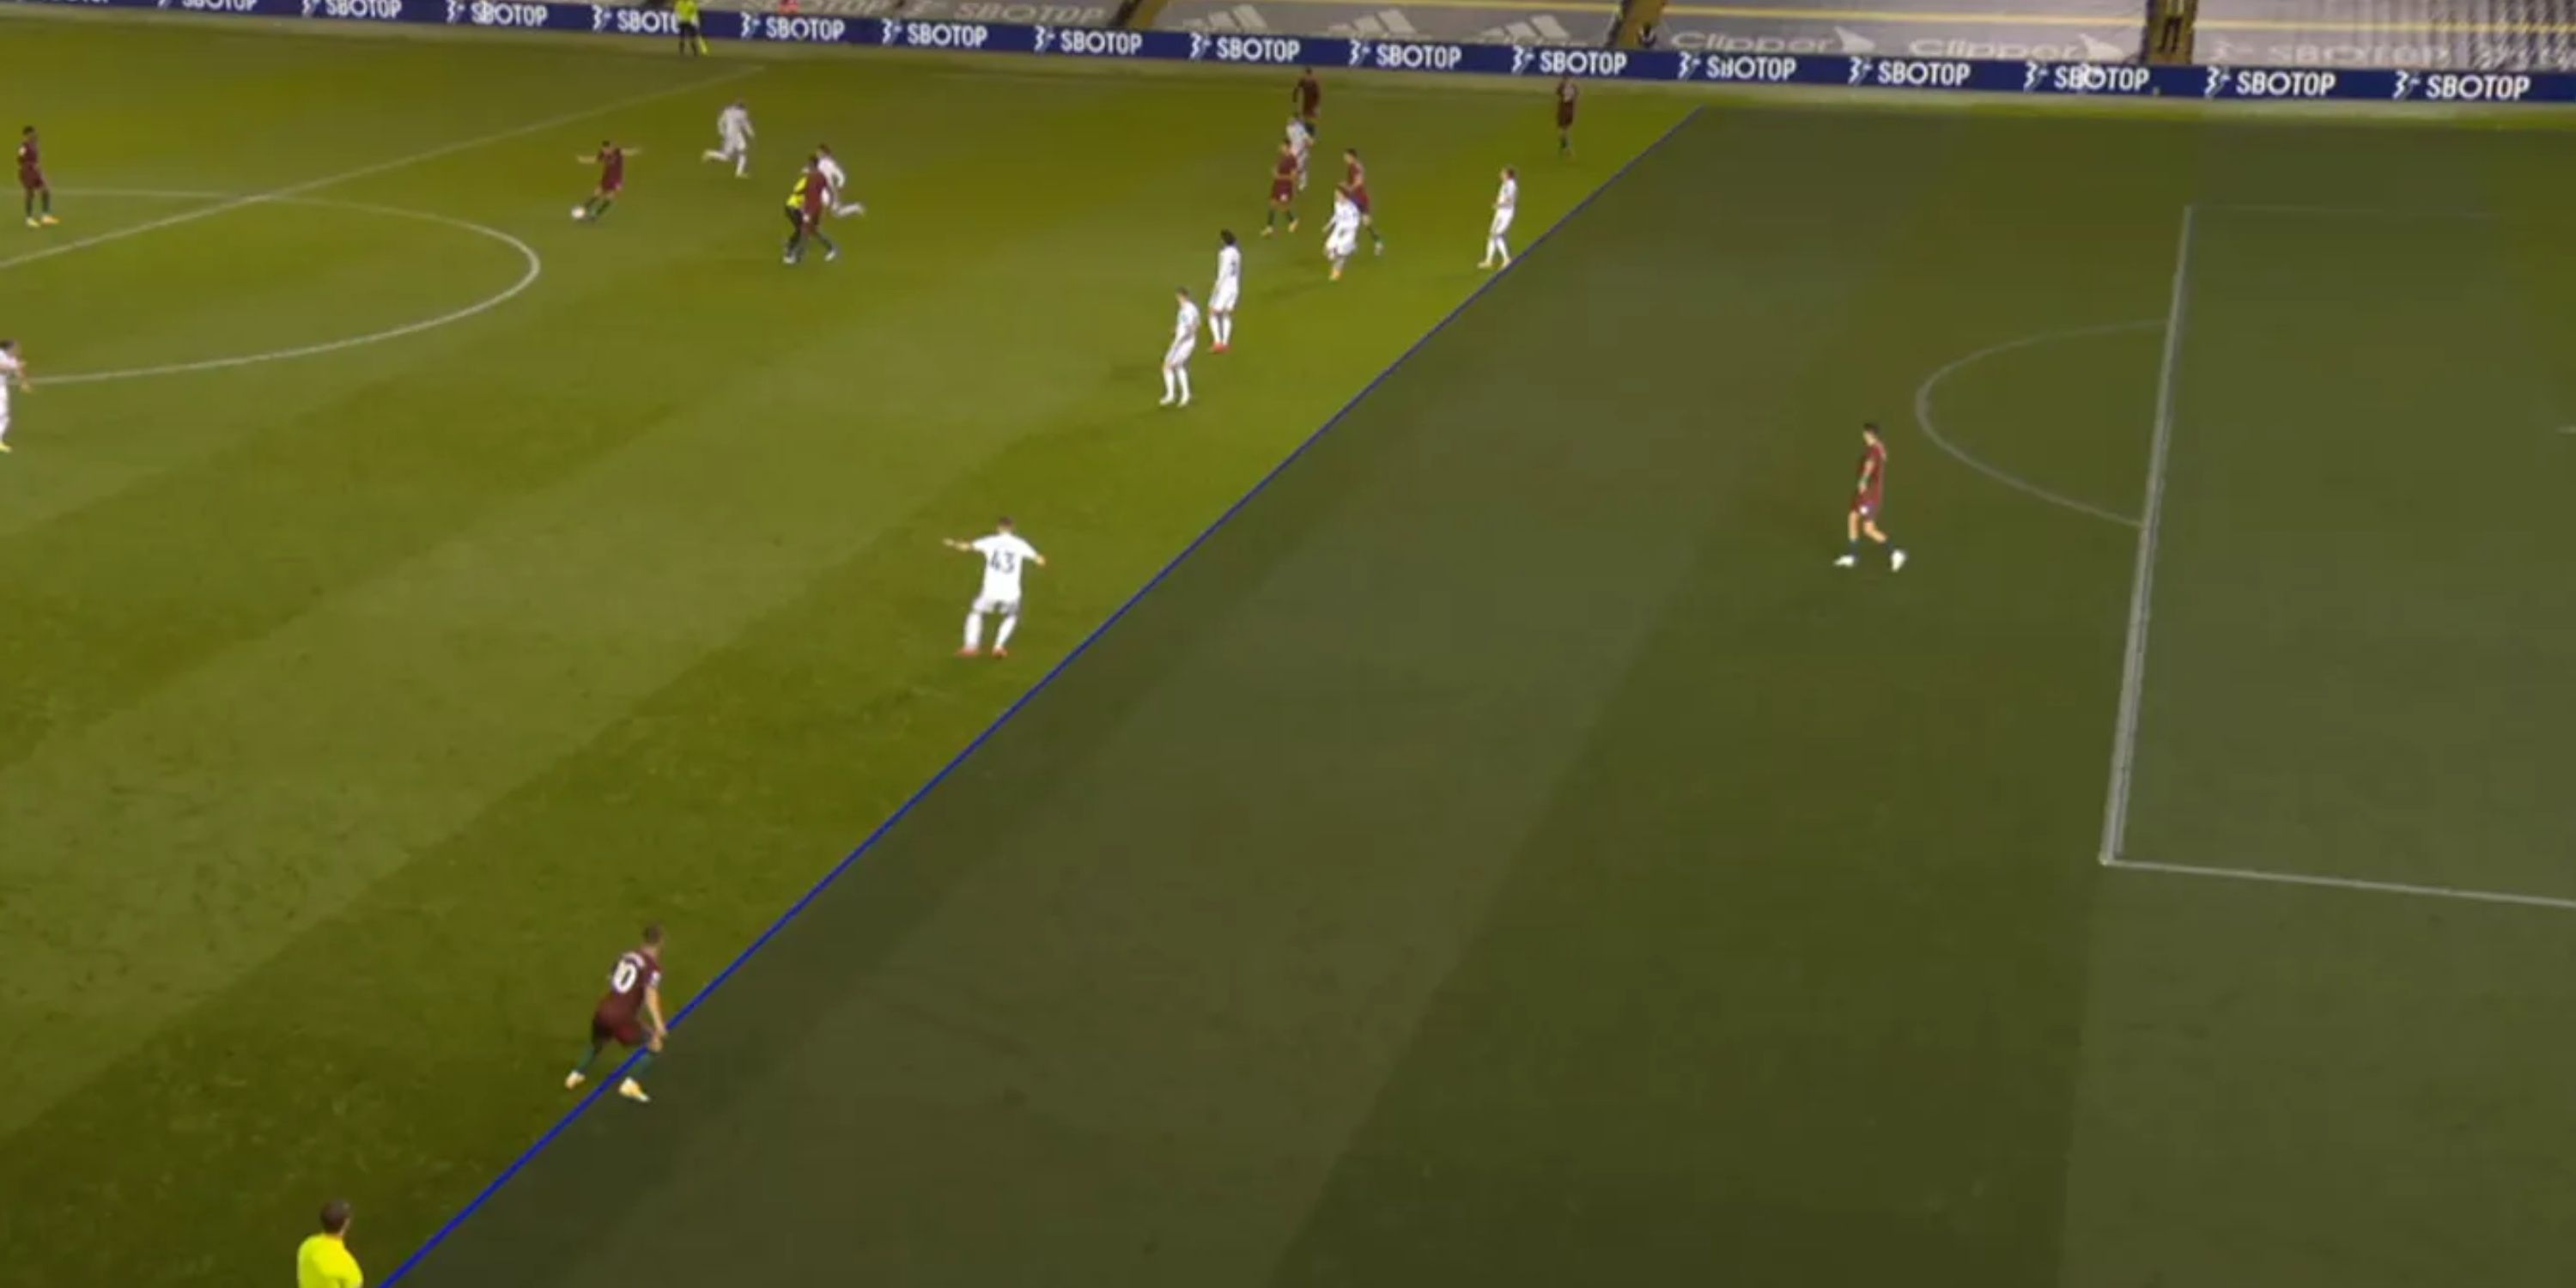 The gridline feature which is used to judge offsides.